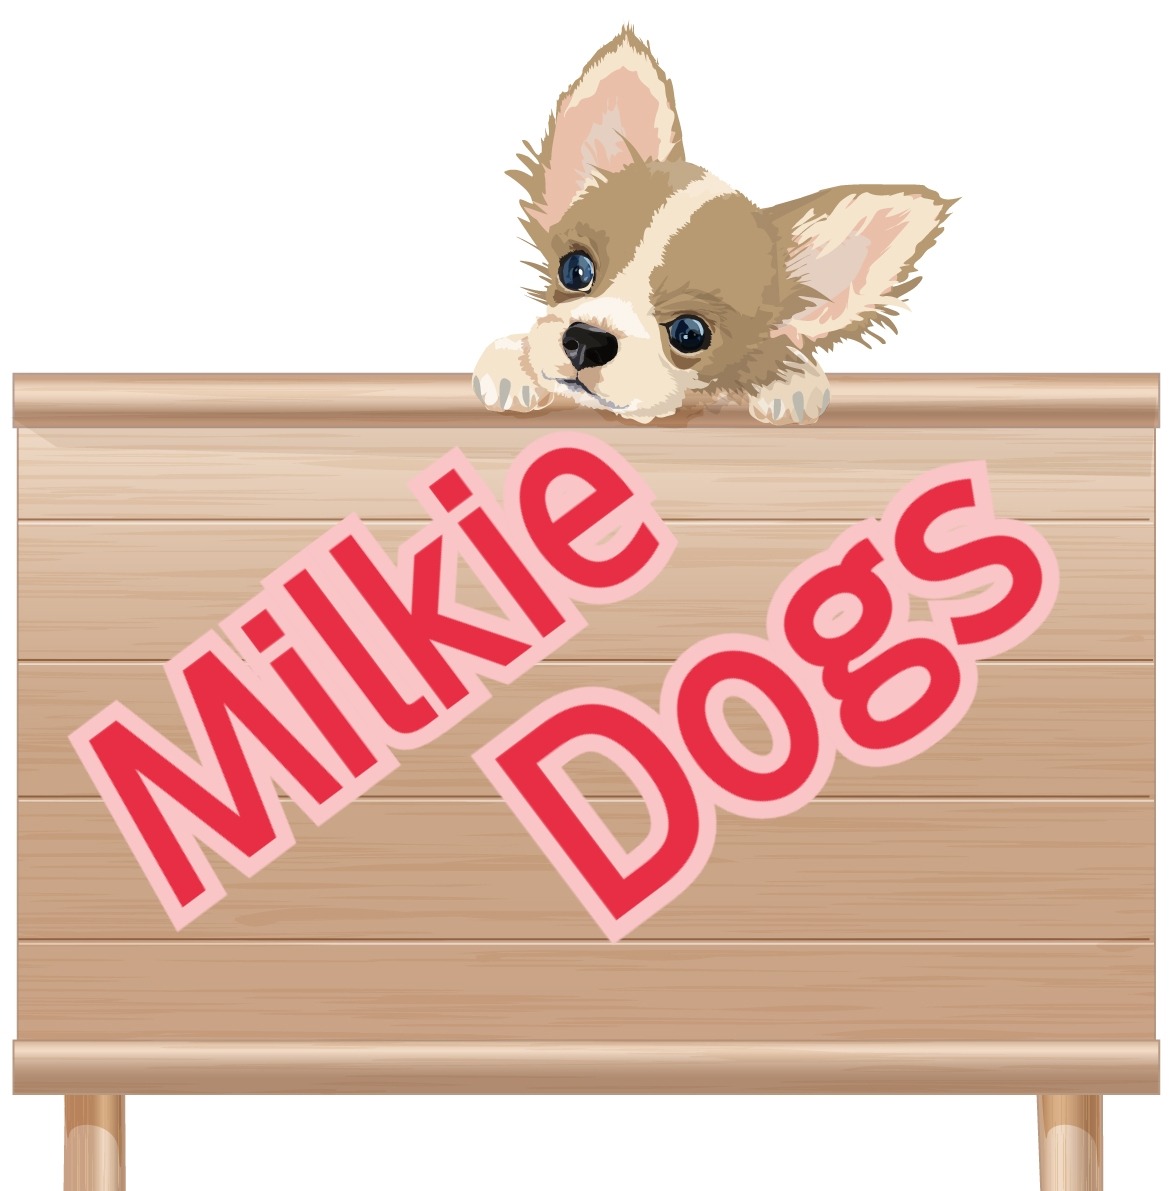 Milkie Dogs